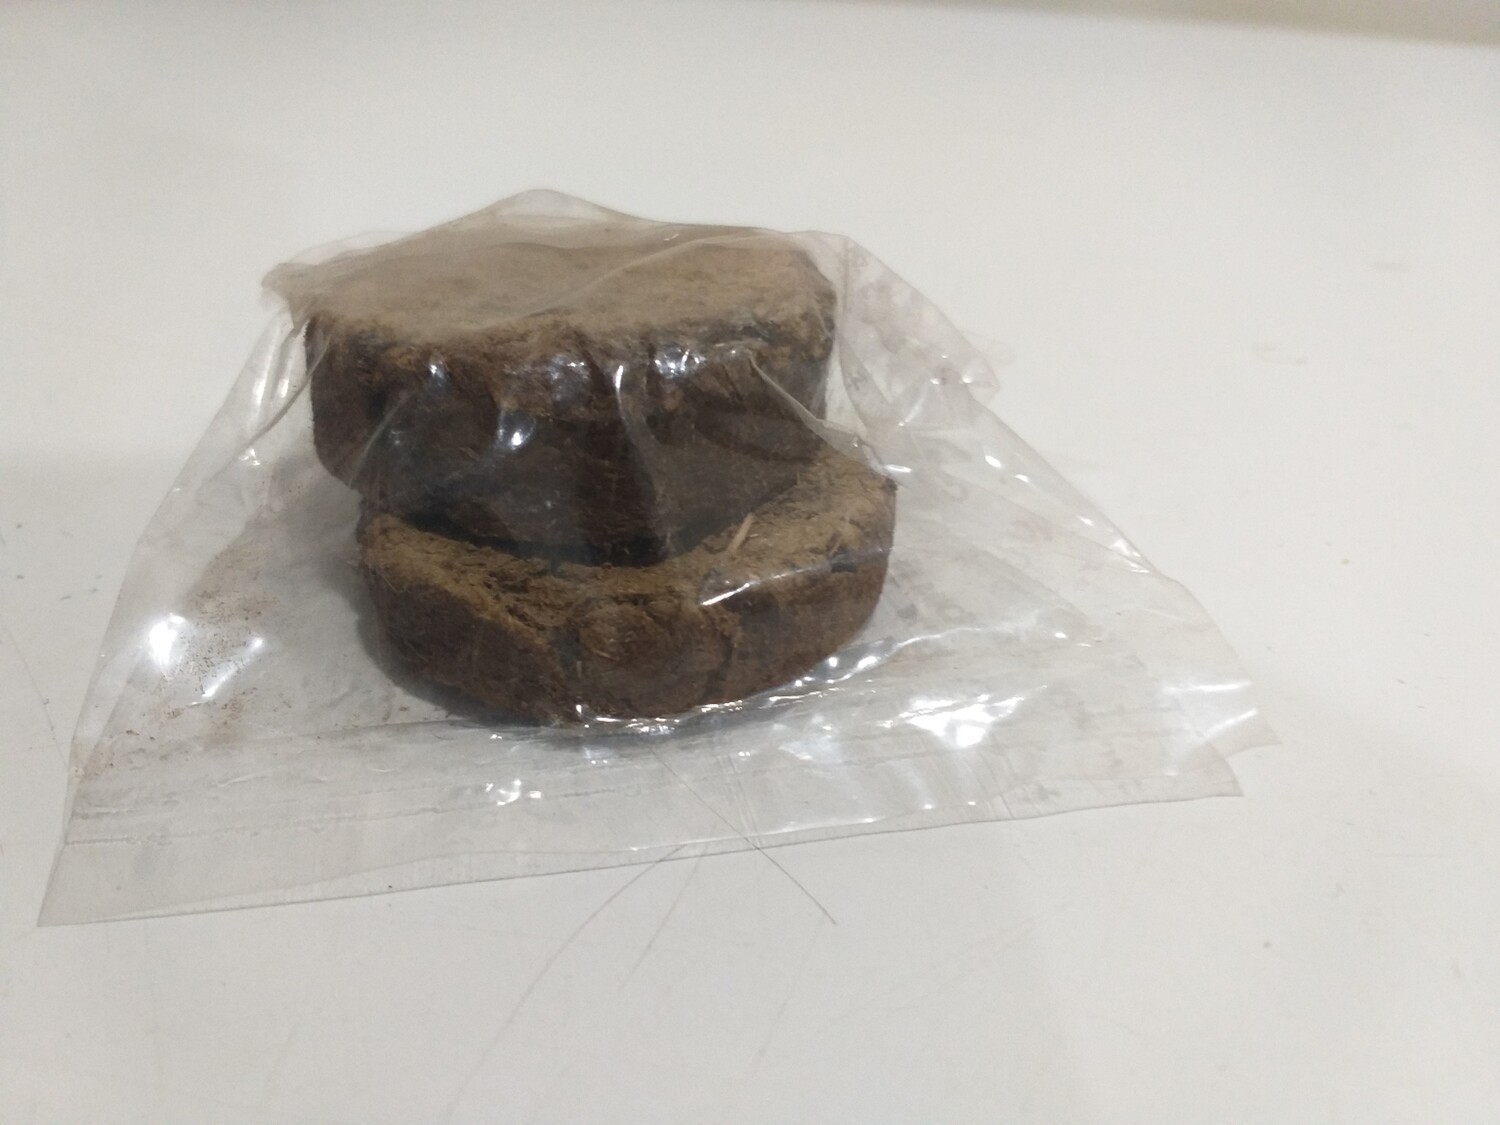 COW DUNG CAKES 2 pcs